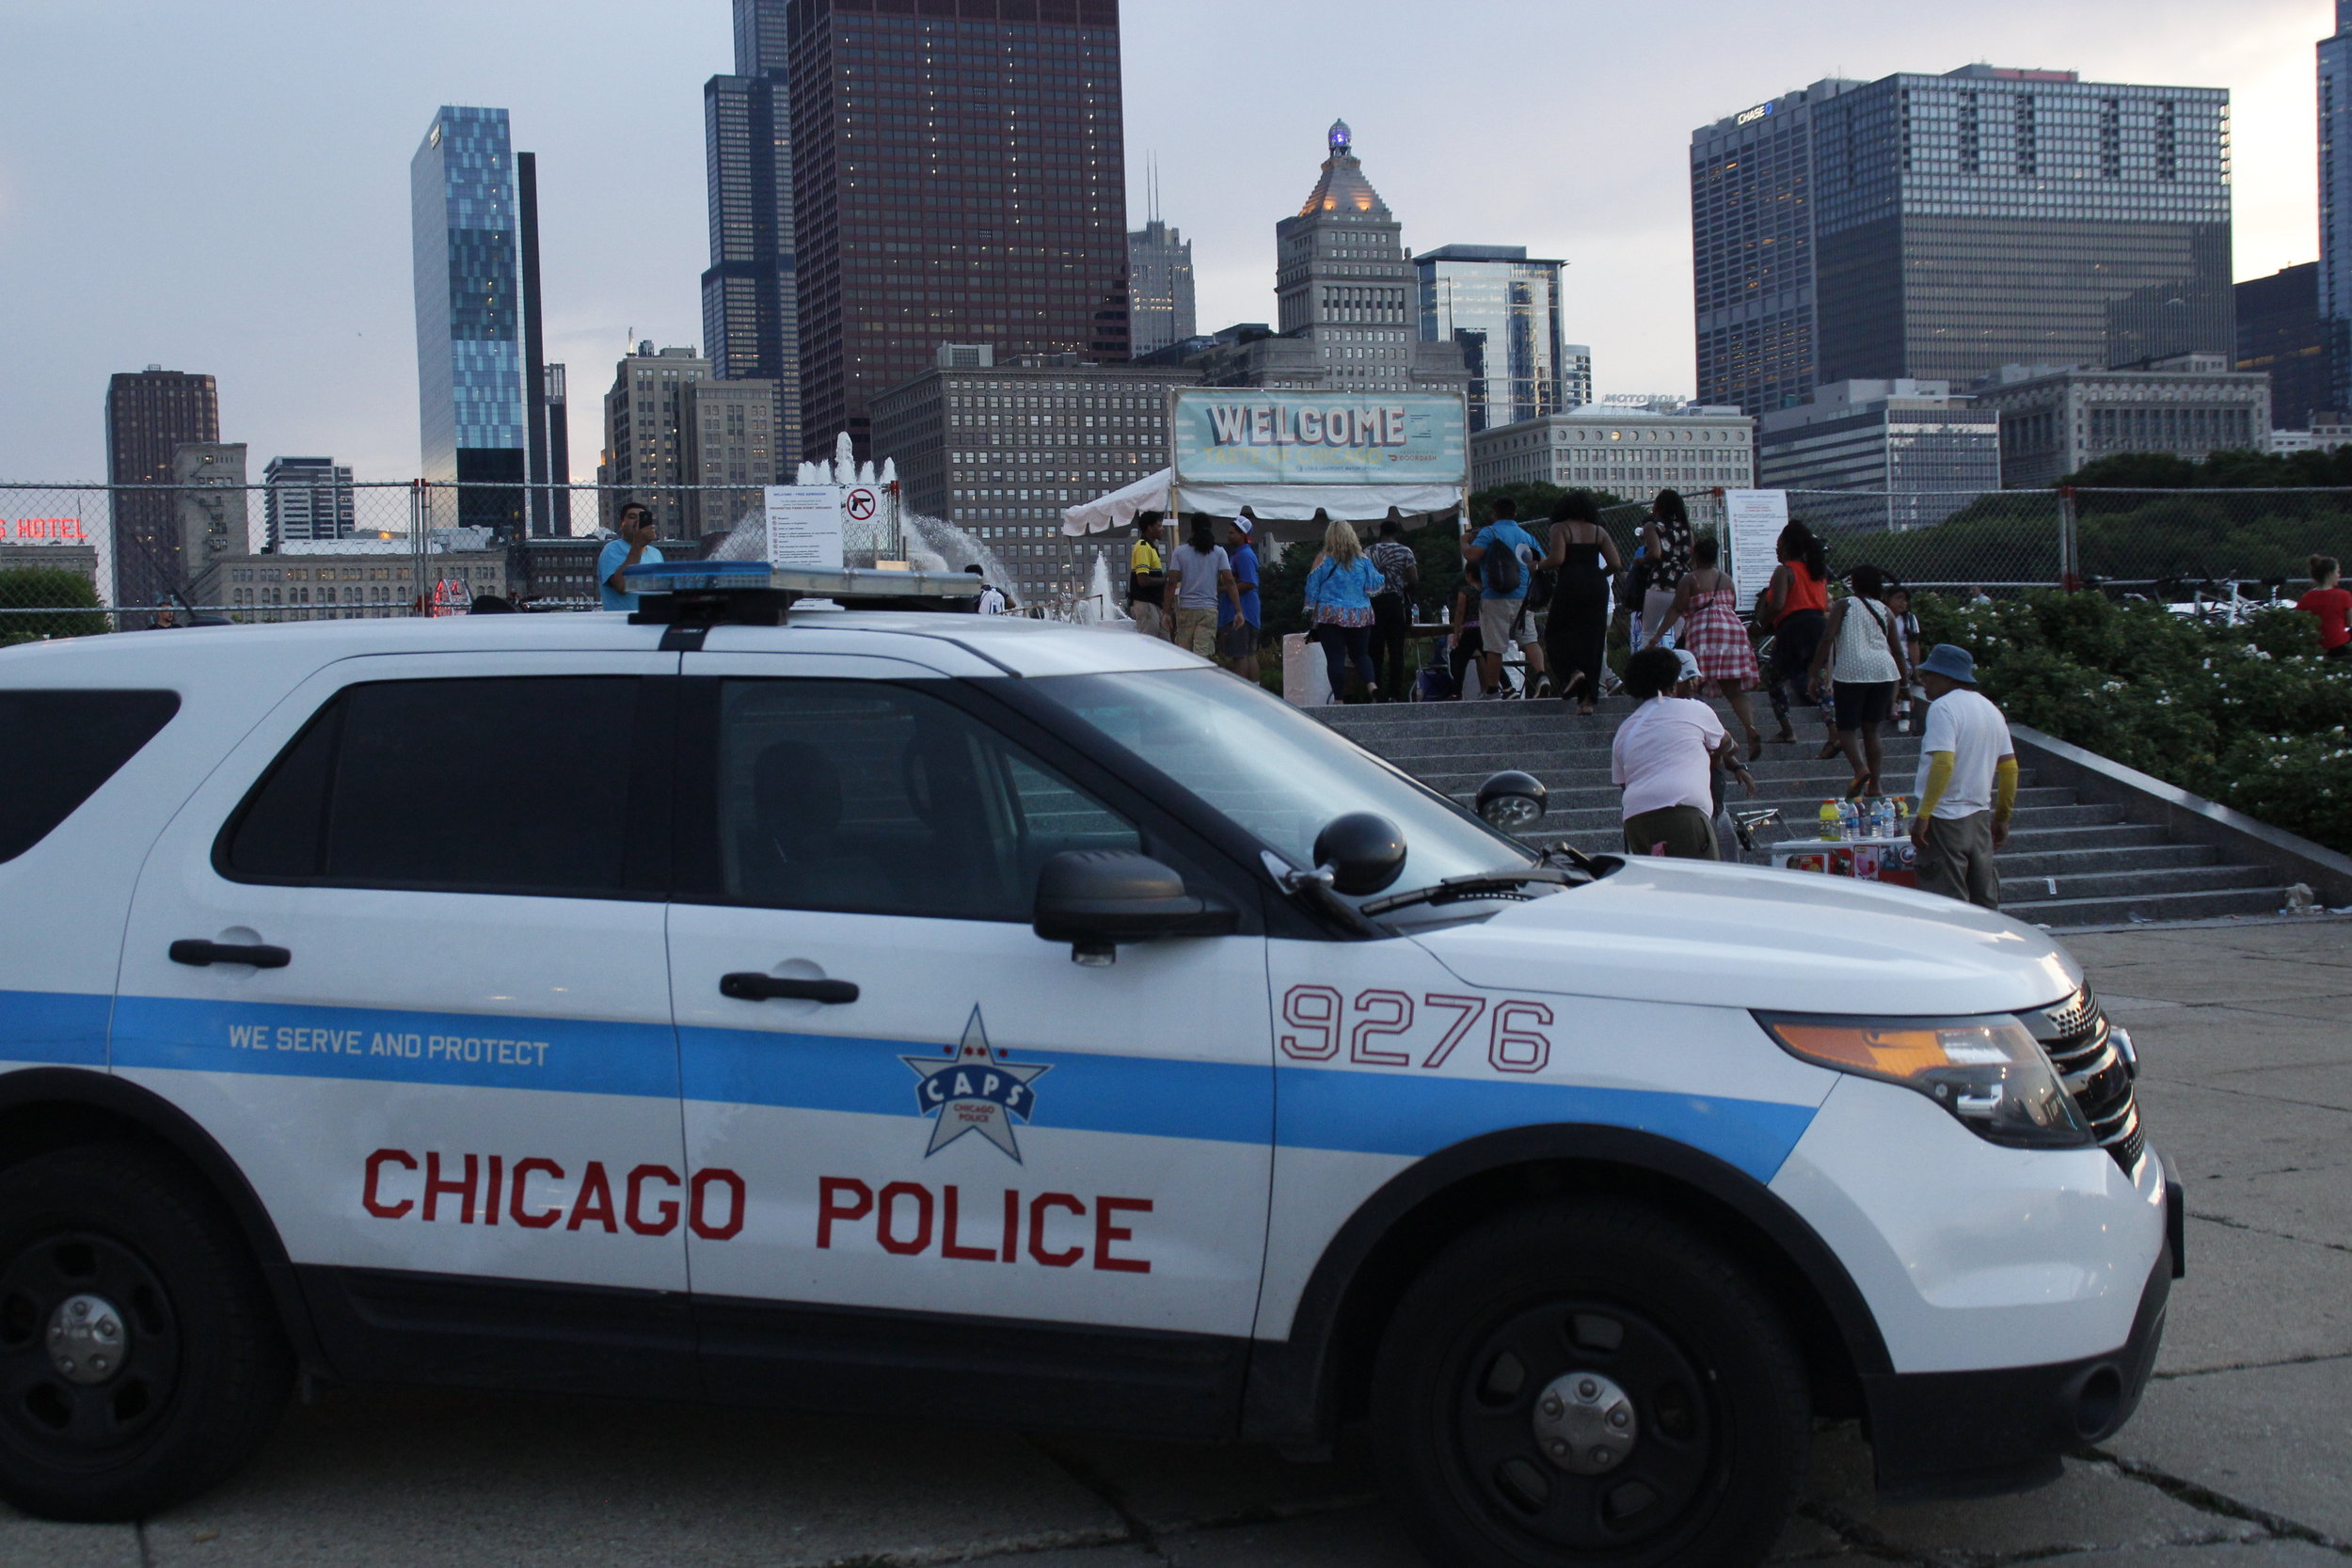  As people came and went to the 2019 Taste of Chicago, Chicago Police Department was posted outside each entrance and exit of the event. Over 100 officers were sent daily from all over the city to provide security for the Taste. 